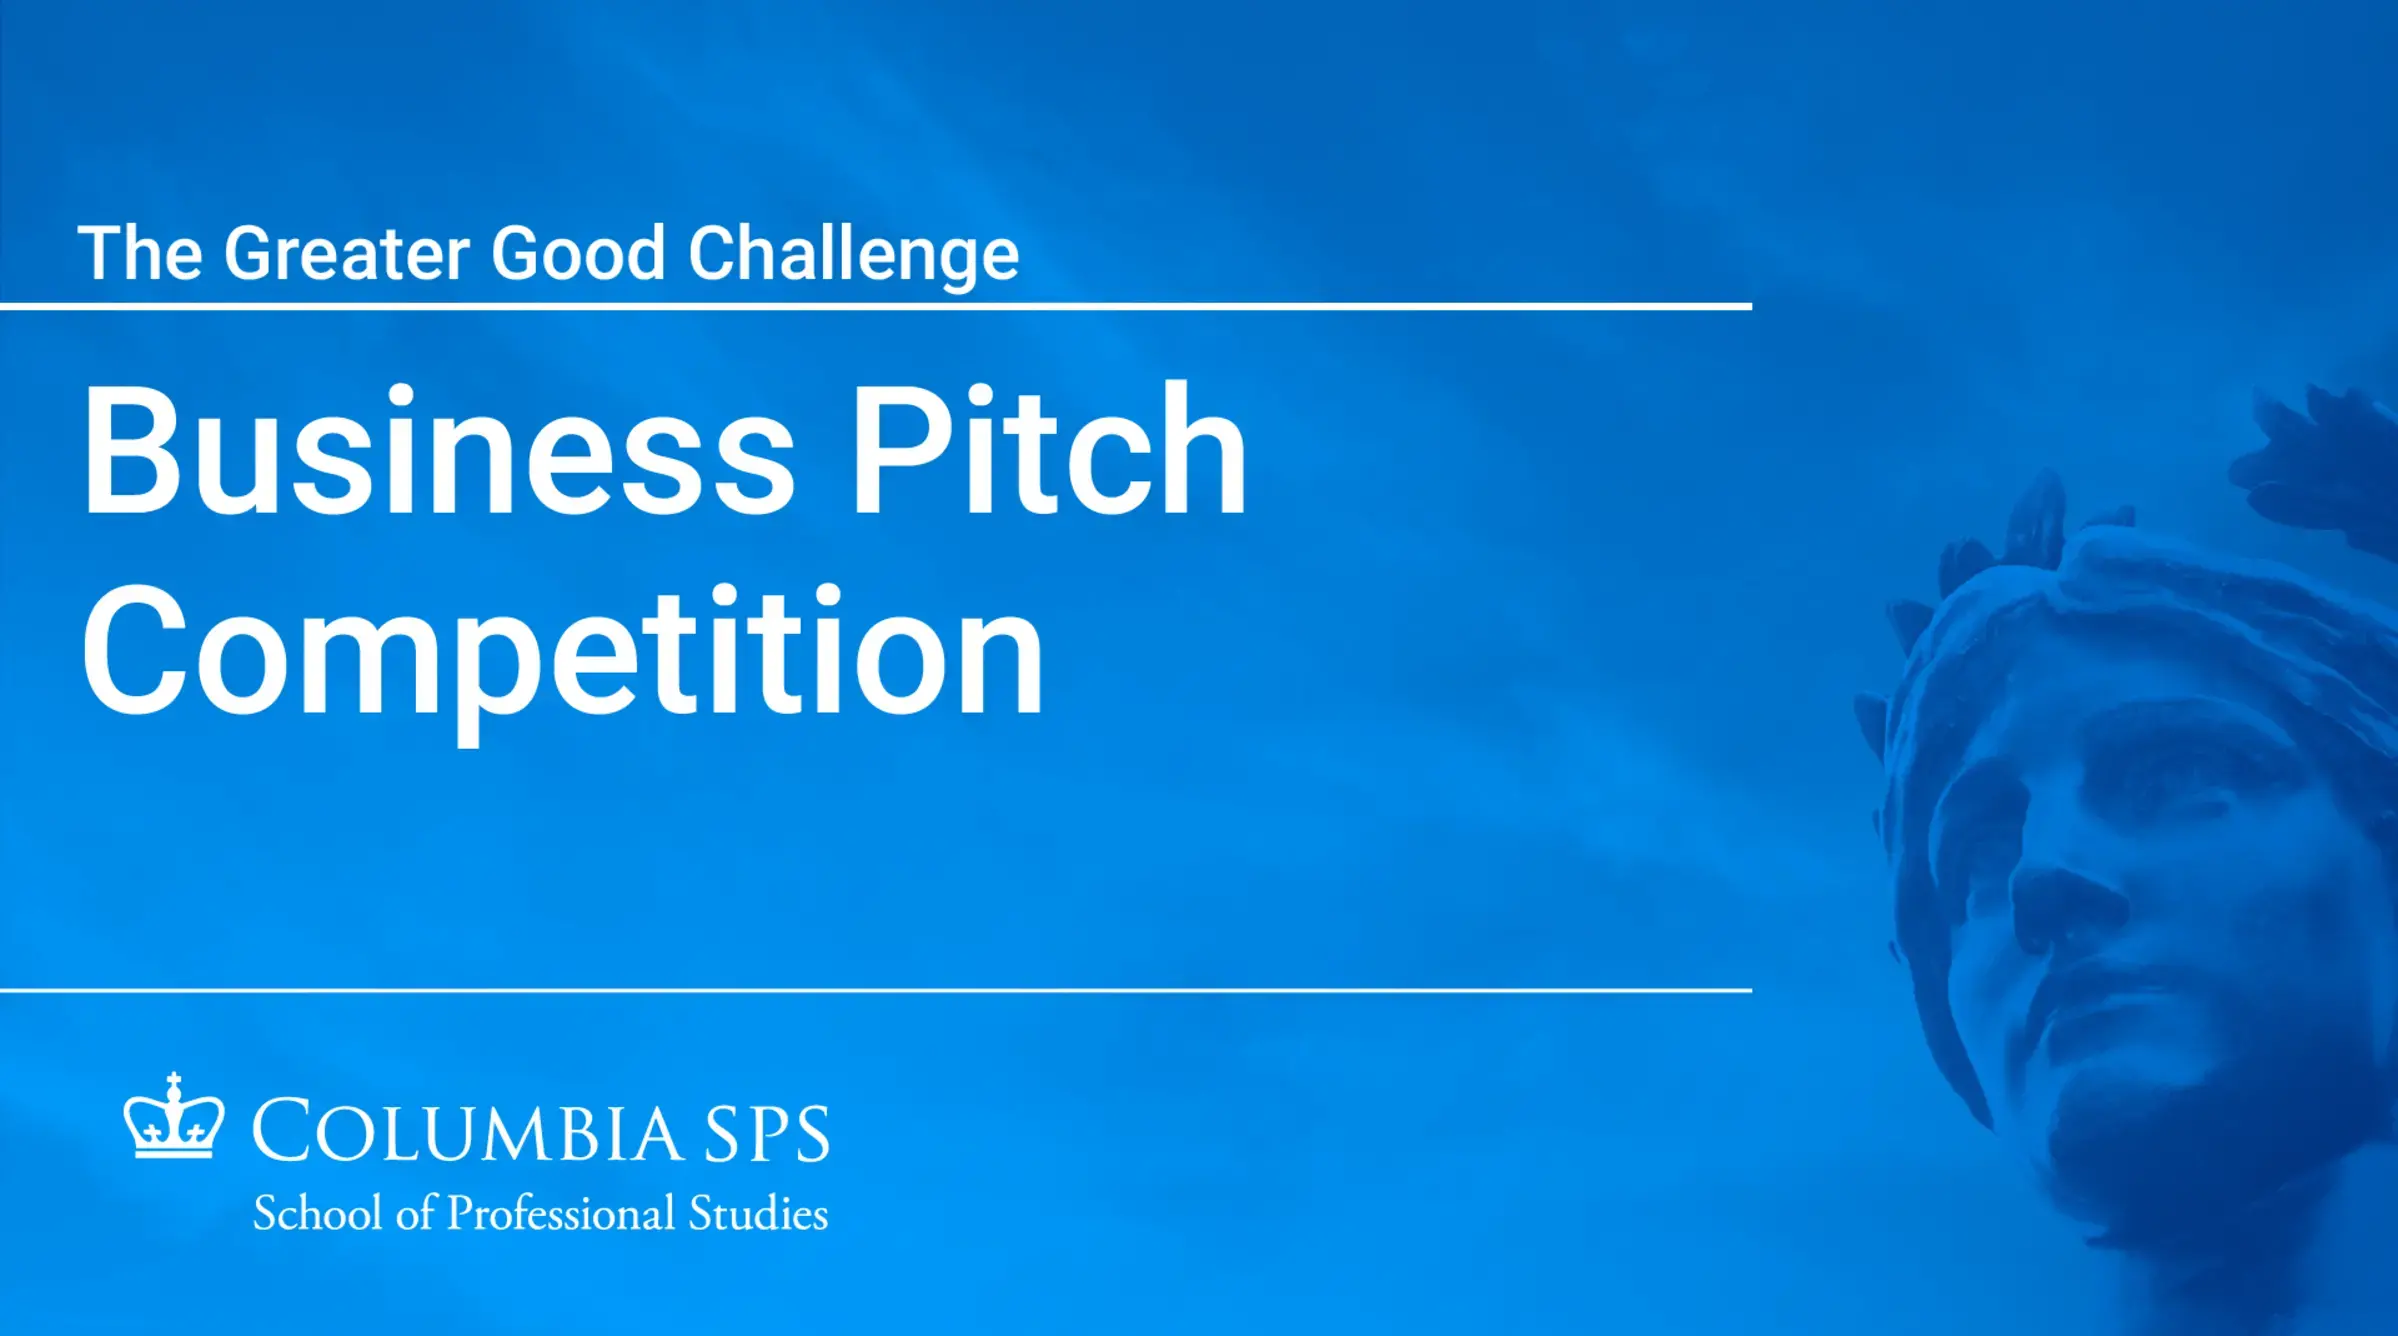 A cover image of a video introducing the Greater Good Challenge Business Pitch Competition.